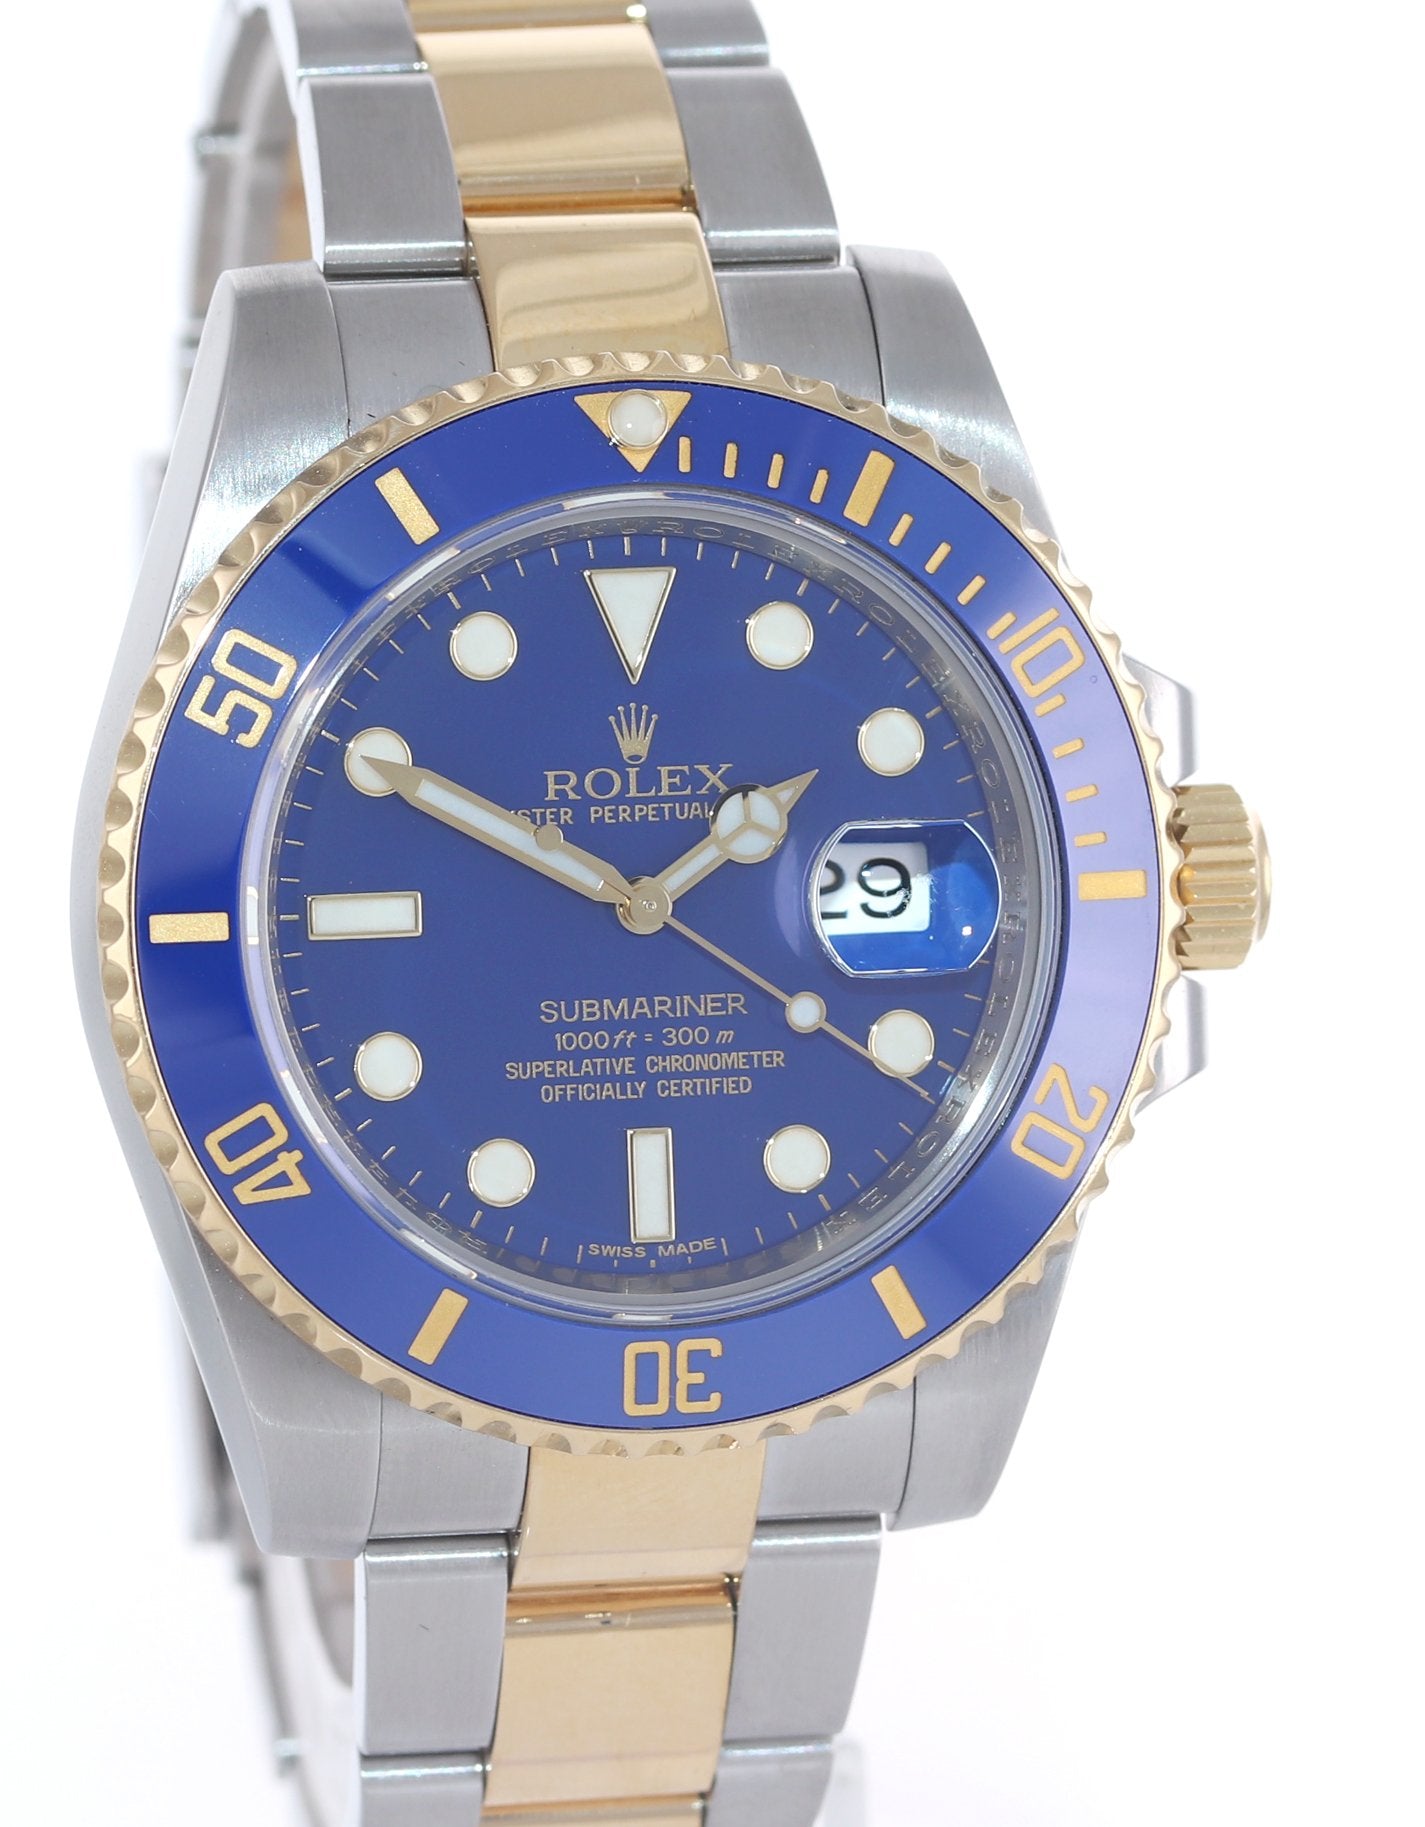 Rolex Submariner Ceramic 116613LB Two Tone Yellow Gold Steel Blue Smurf Watch